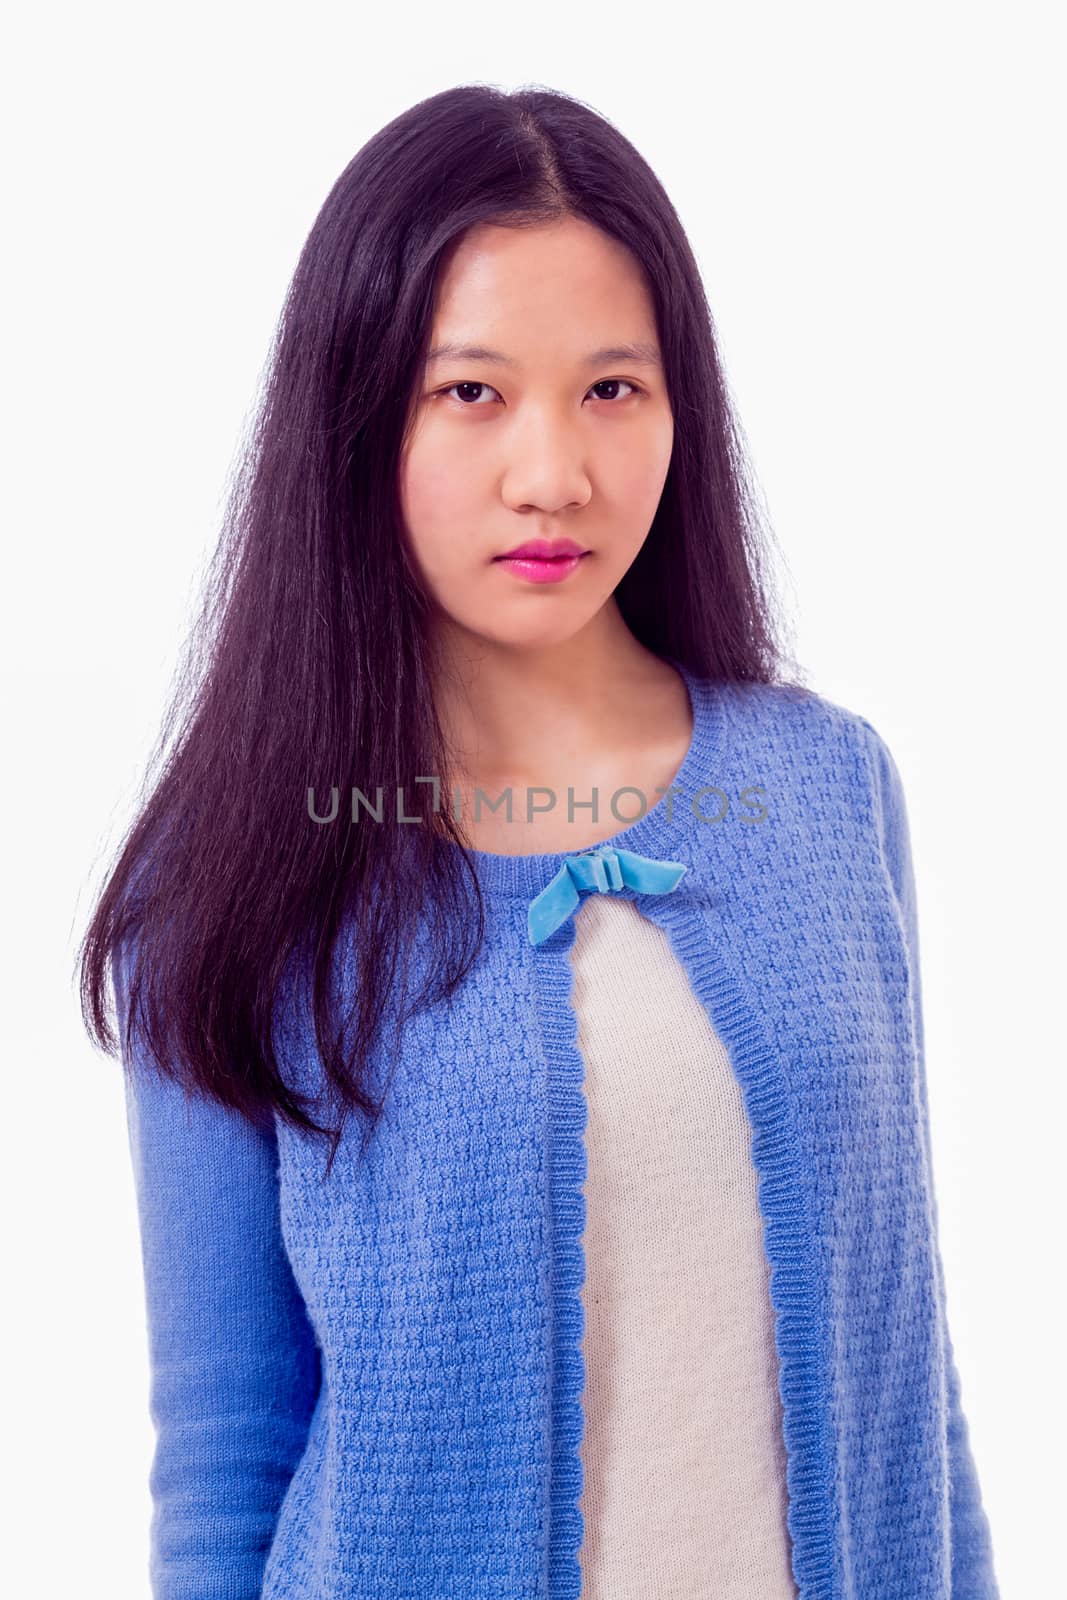 Portrait of Chinese teenage girl looking at camera, serious expression